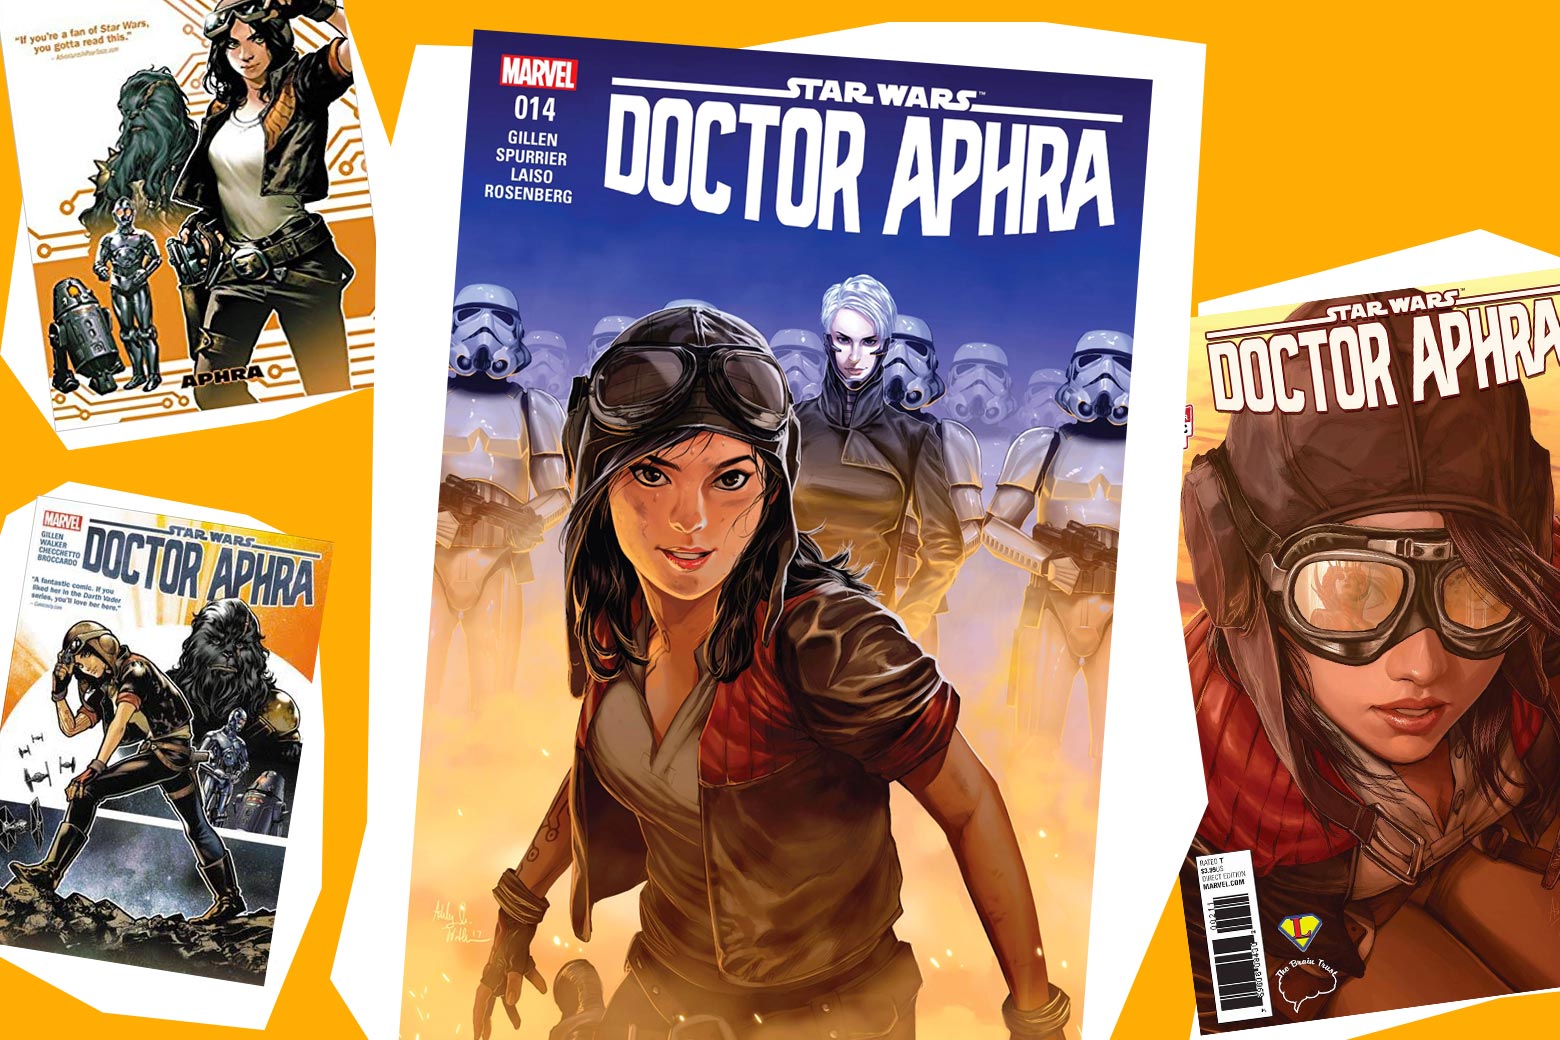 Covers from the Doctor Aphra comics series.